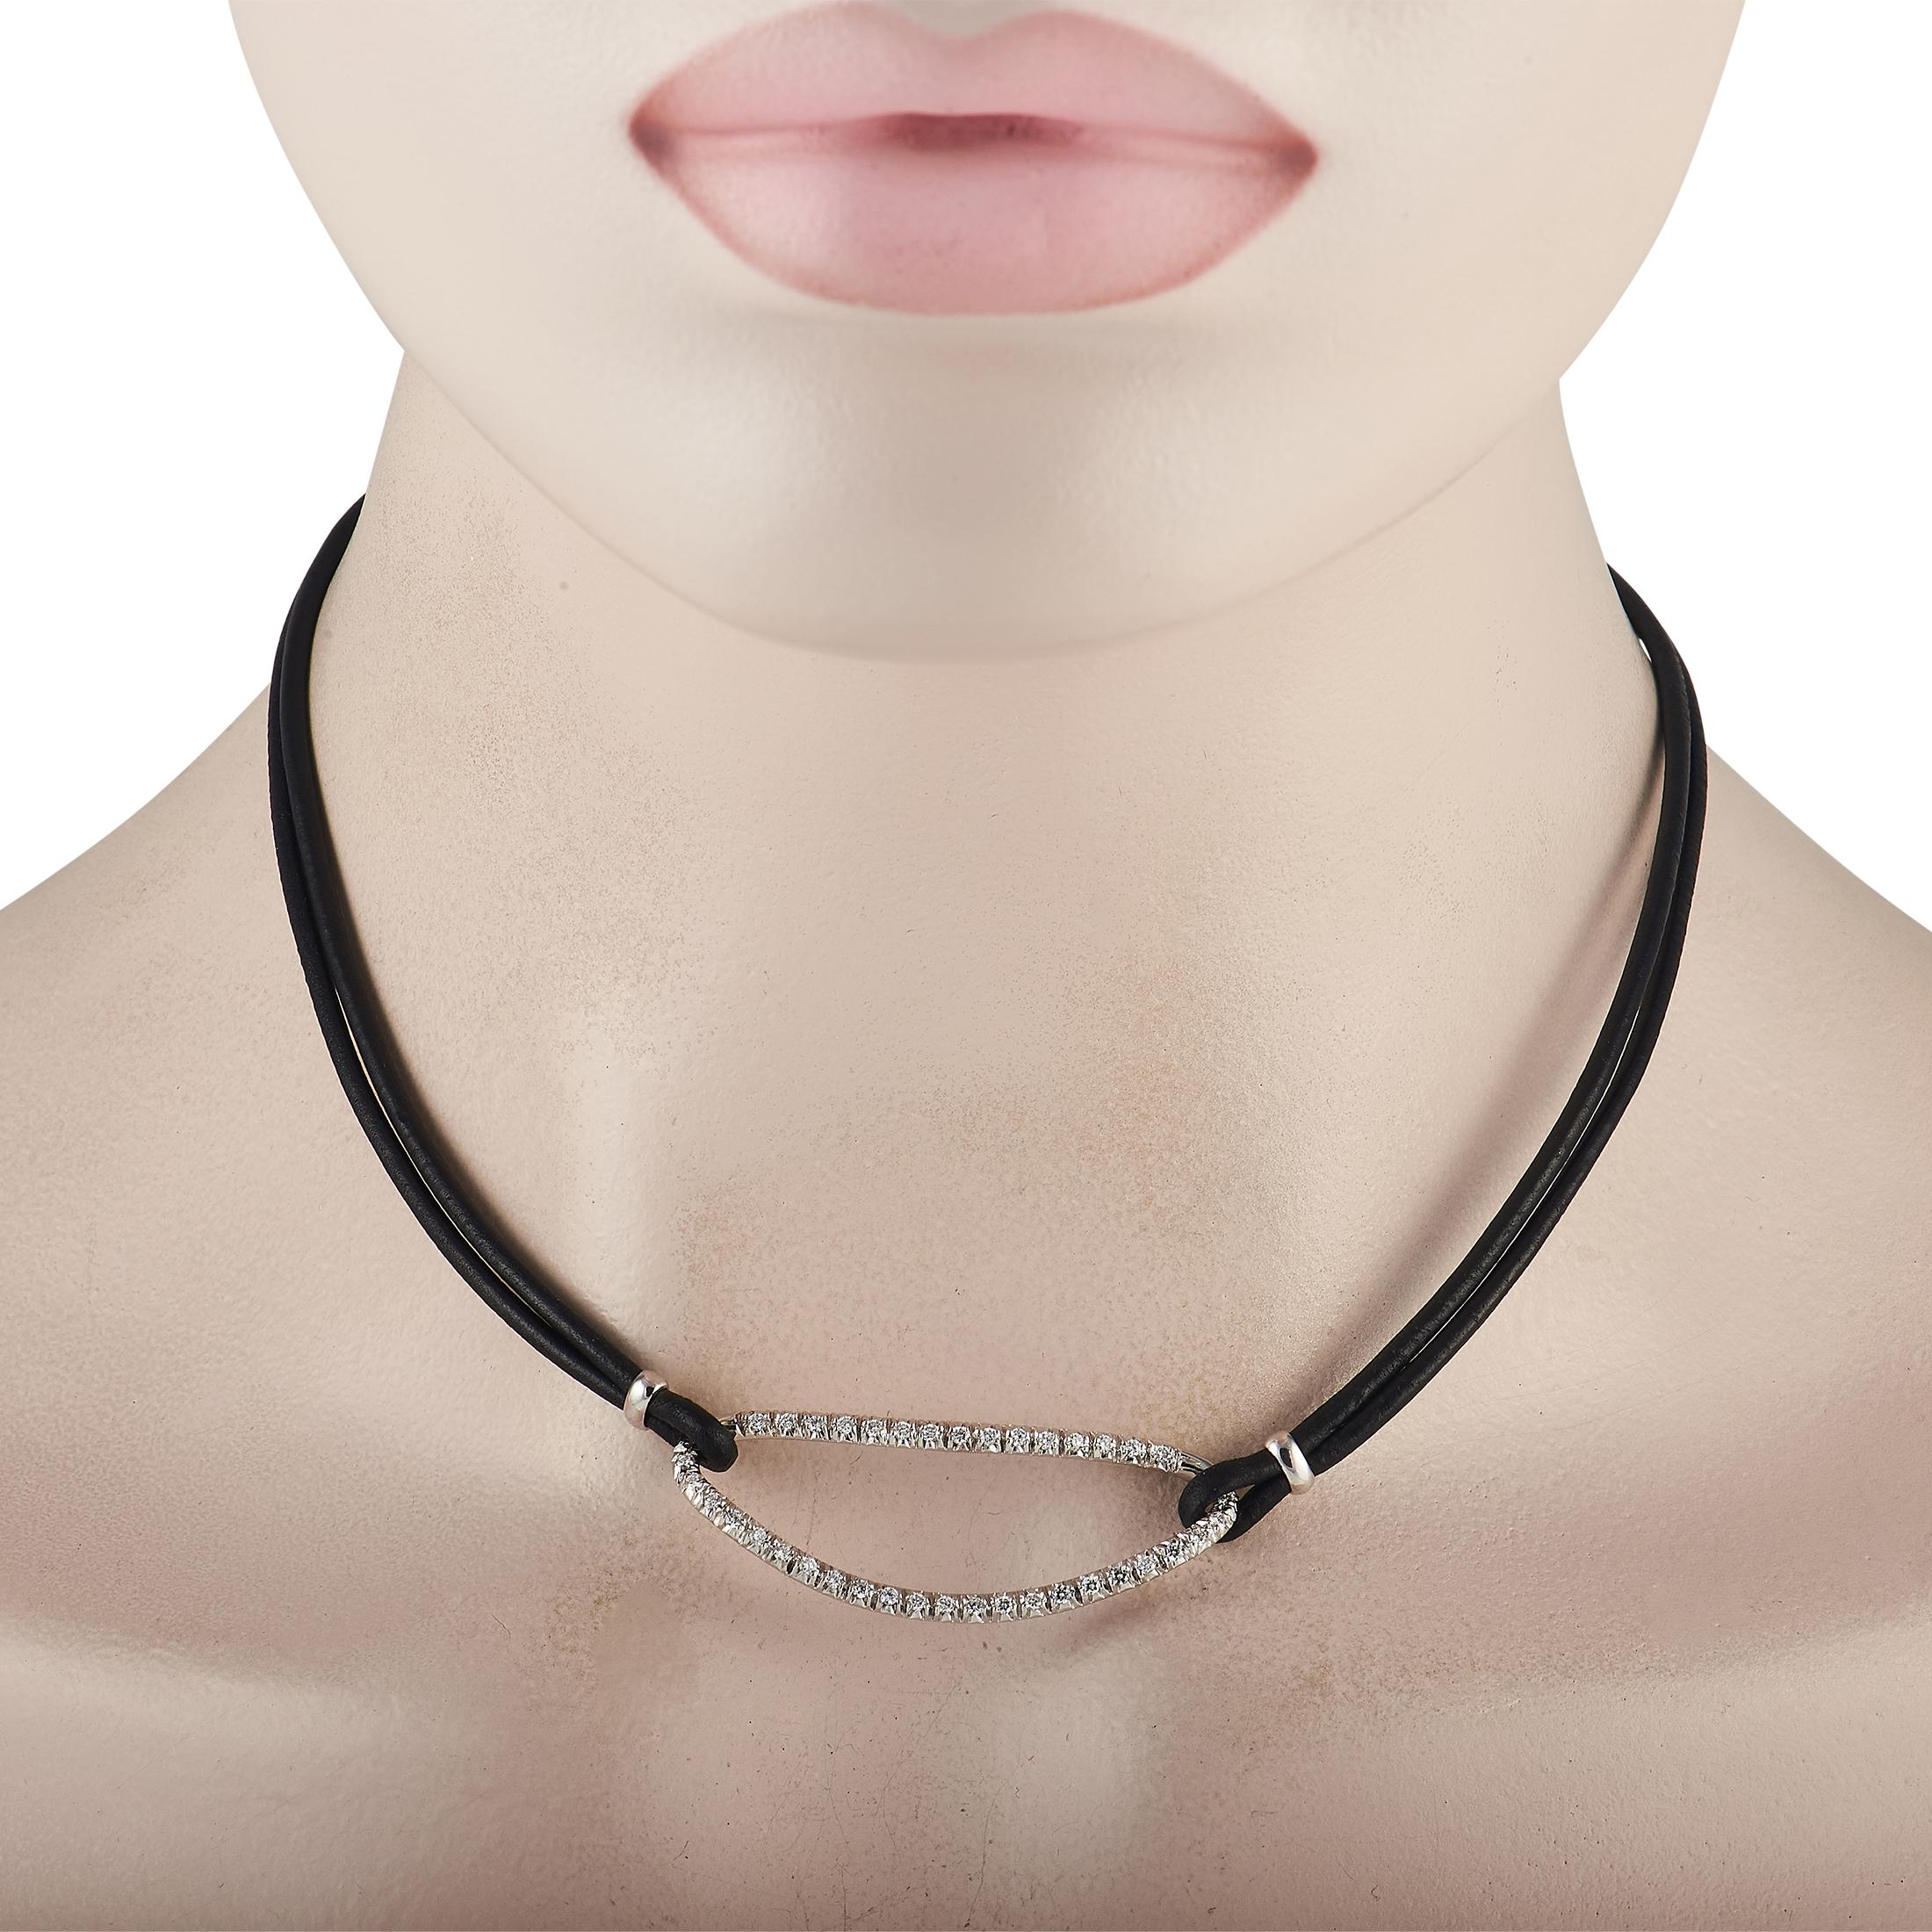 A must-have for an edgy wardrobe. Don this black cord and diamond choker necklace and nail the rock-chic look. This Piero Milano necklace features a 14-inch black cord necklace holding a sculpted oval pendant in white gold. The pendant is traced